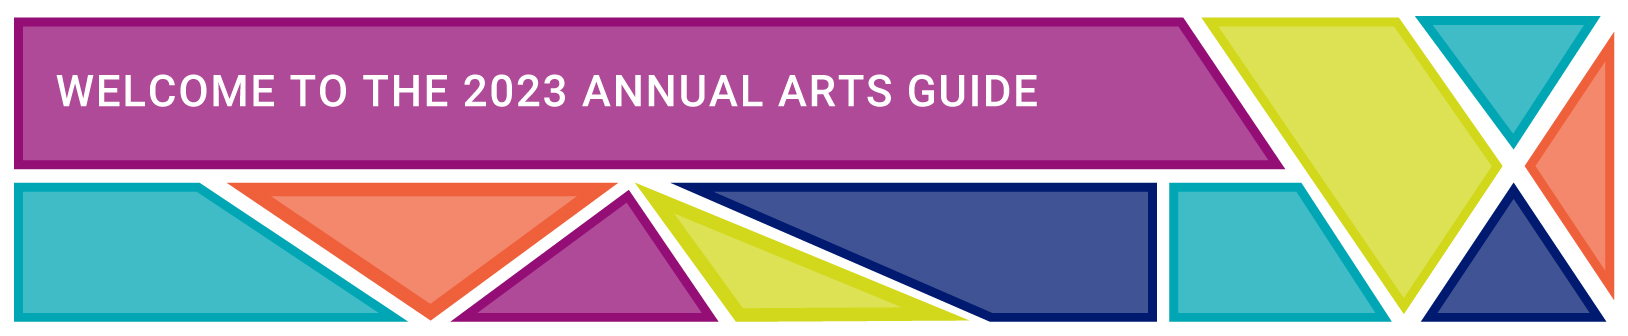 Welcome to the 2023 Arts Guide